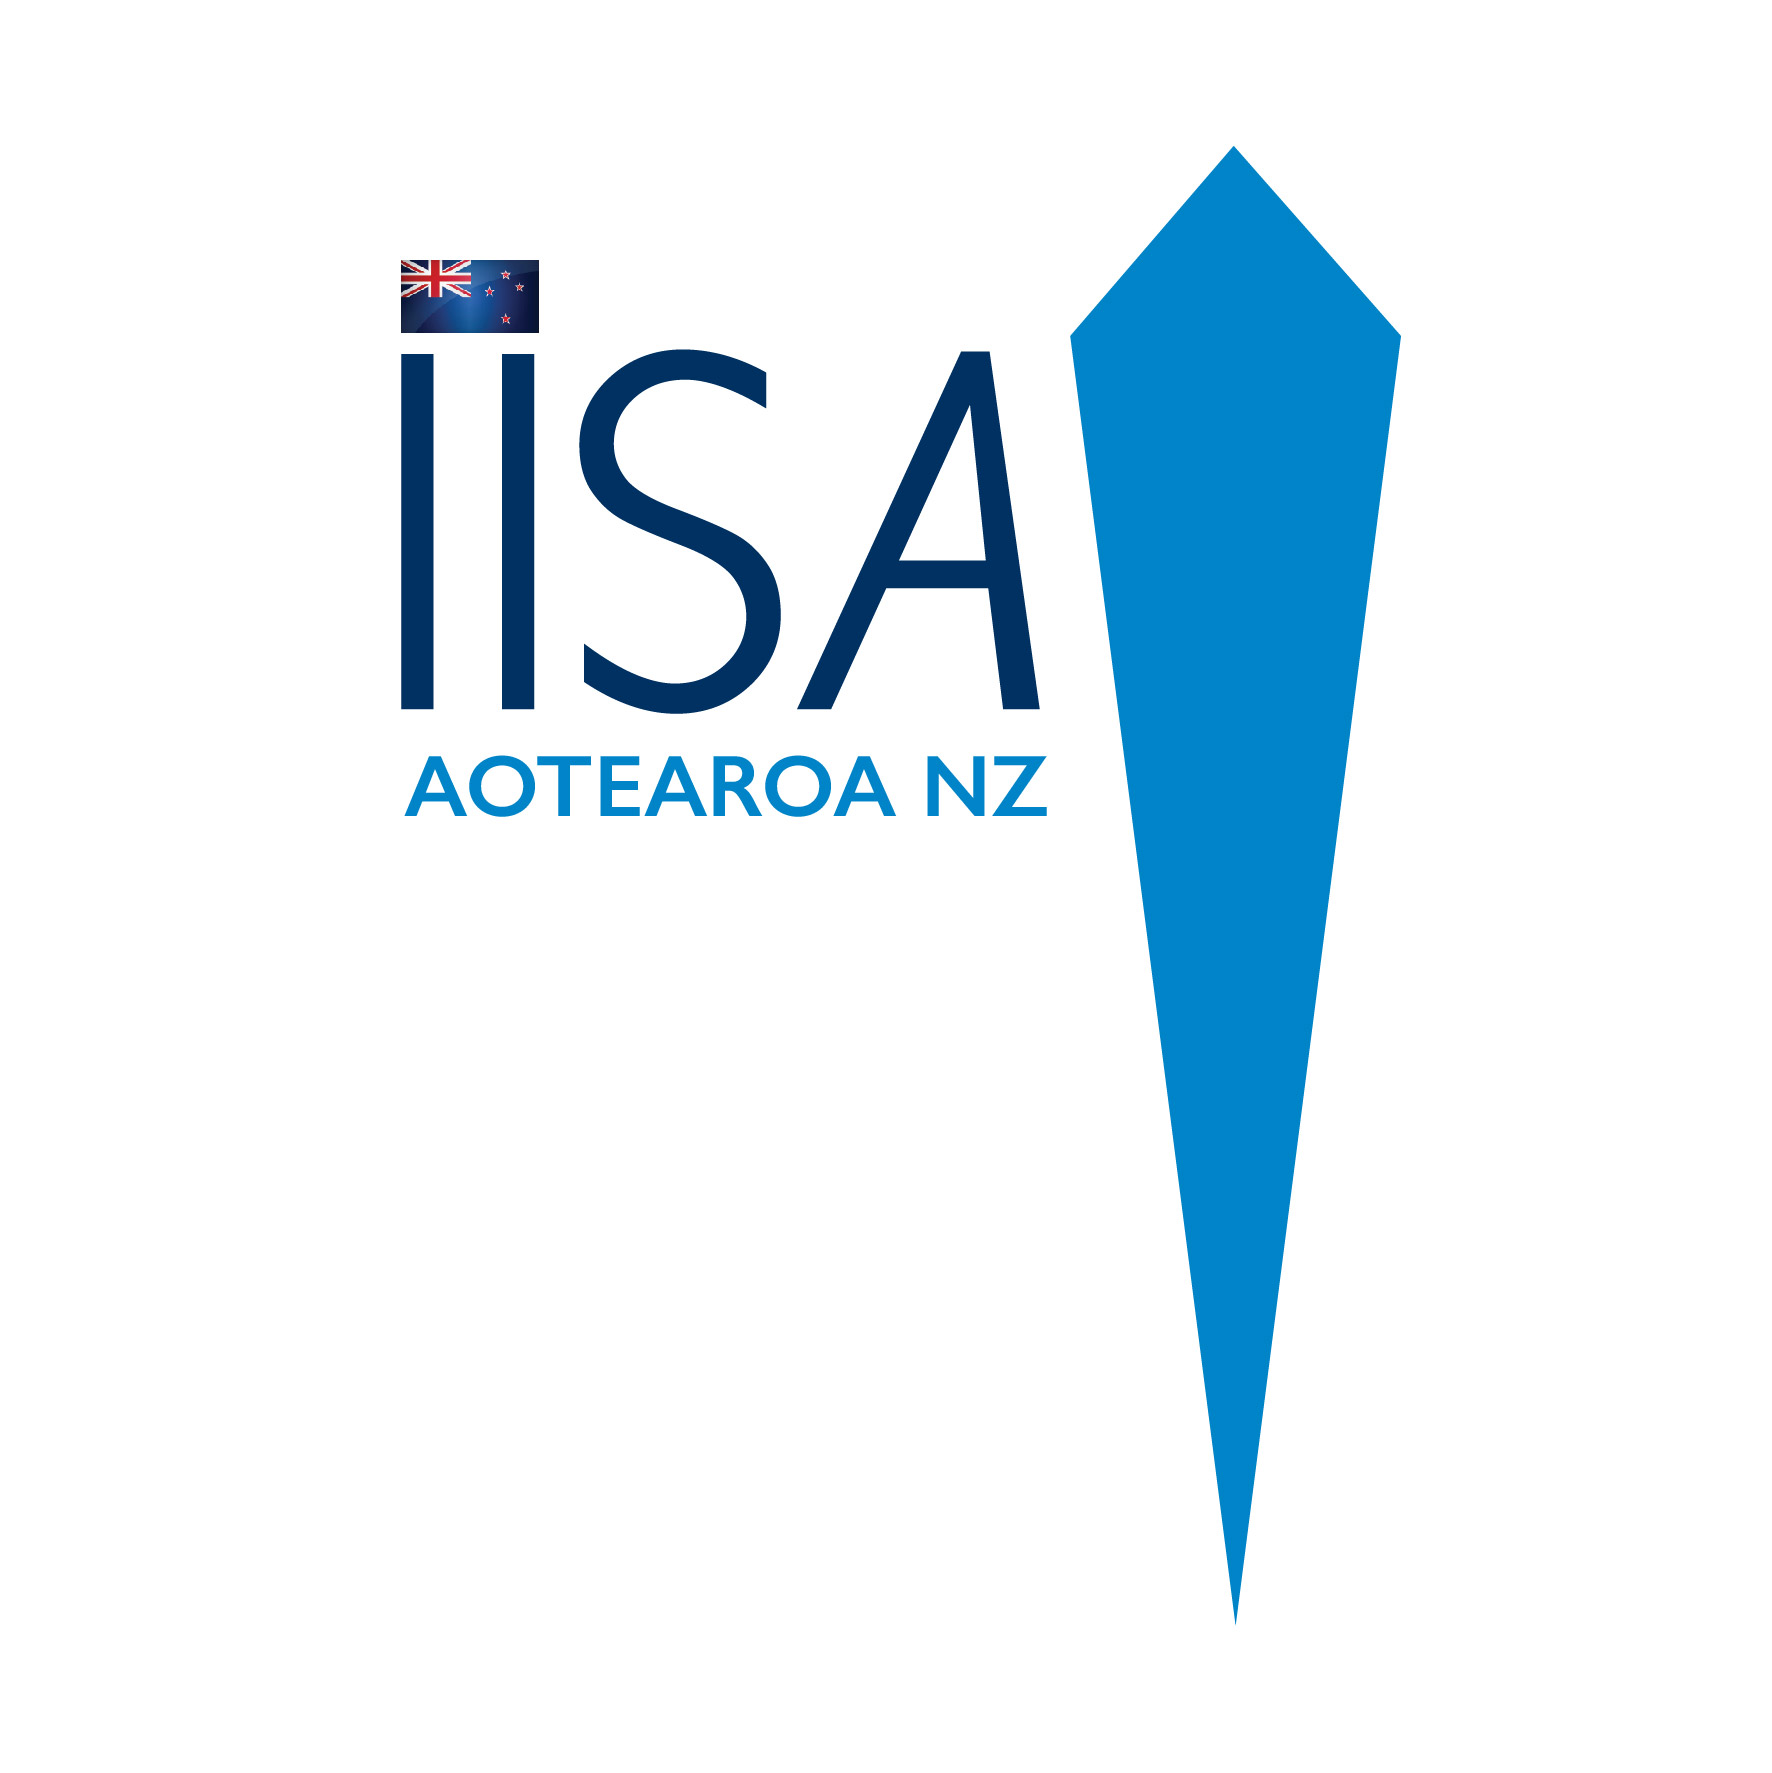 IISA Aotearoa New Zealand - For cold water swimmers in New Zealand